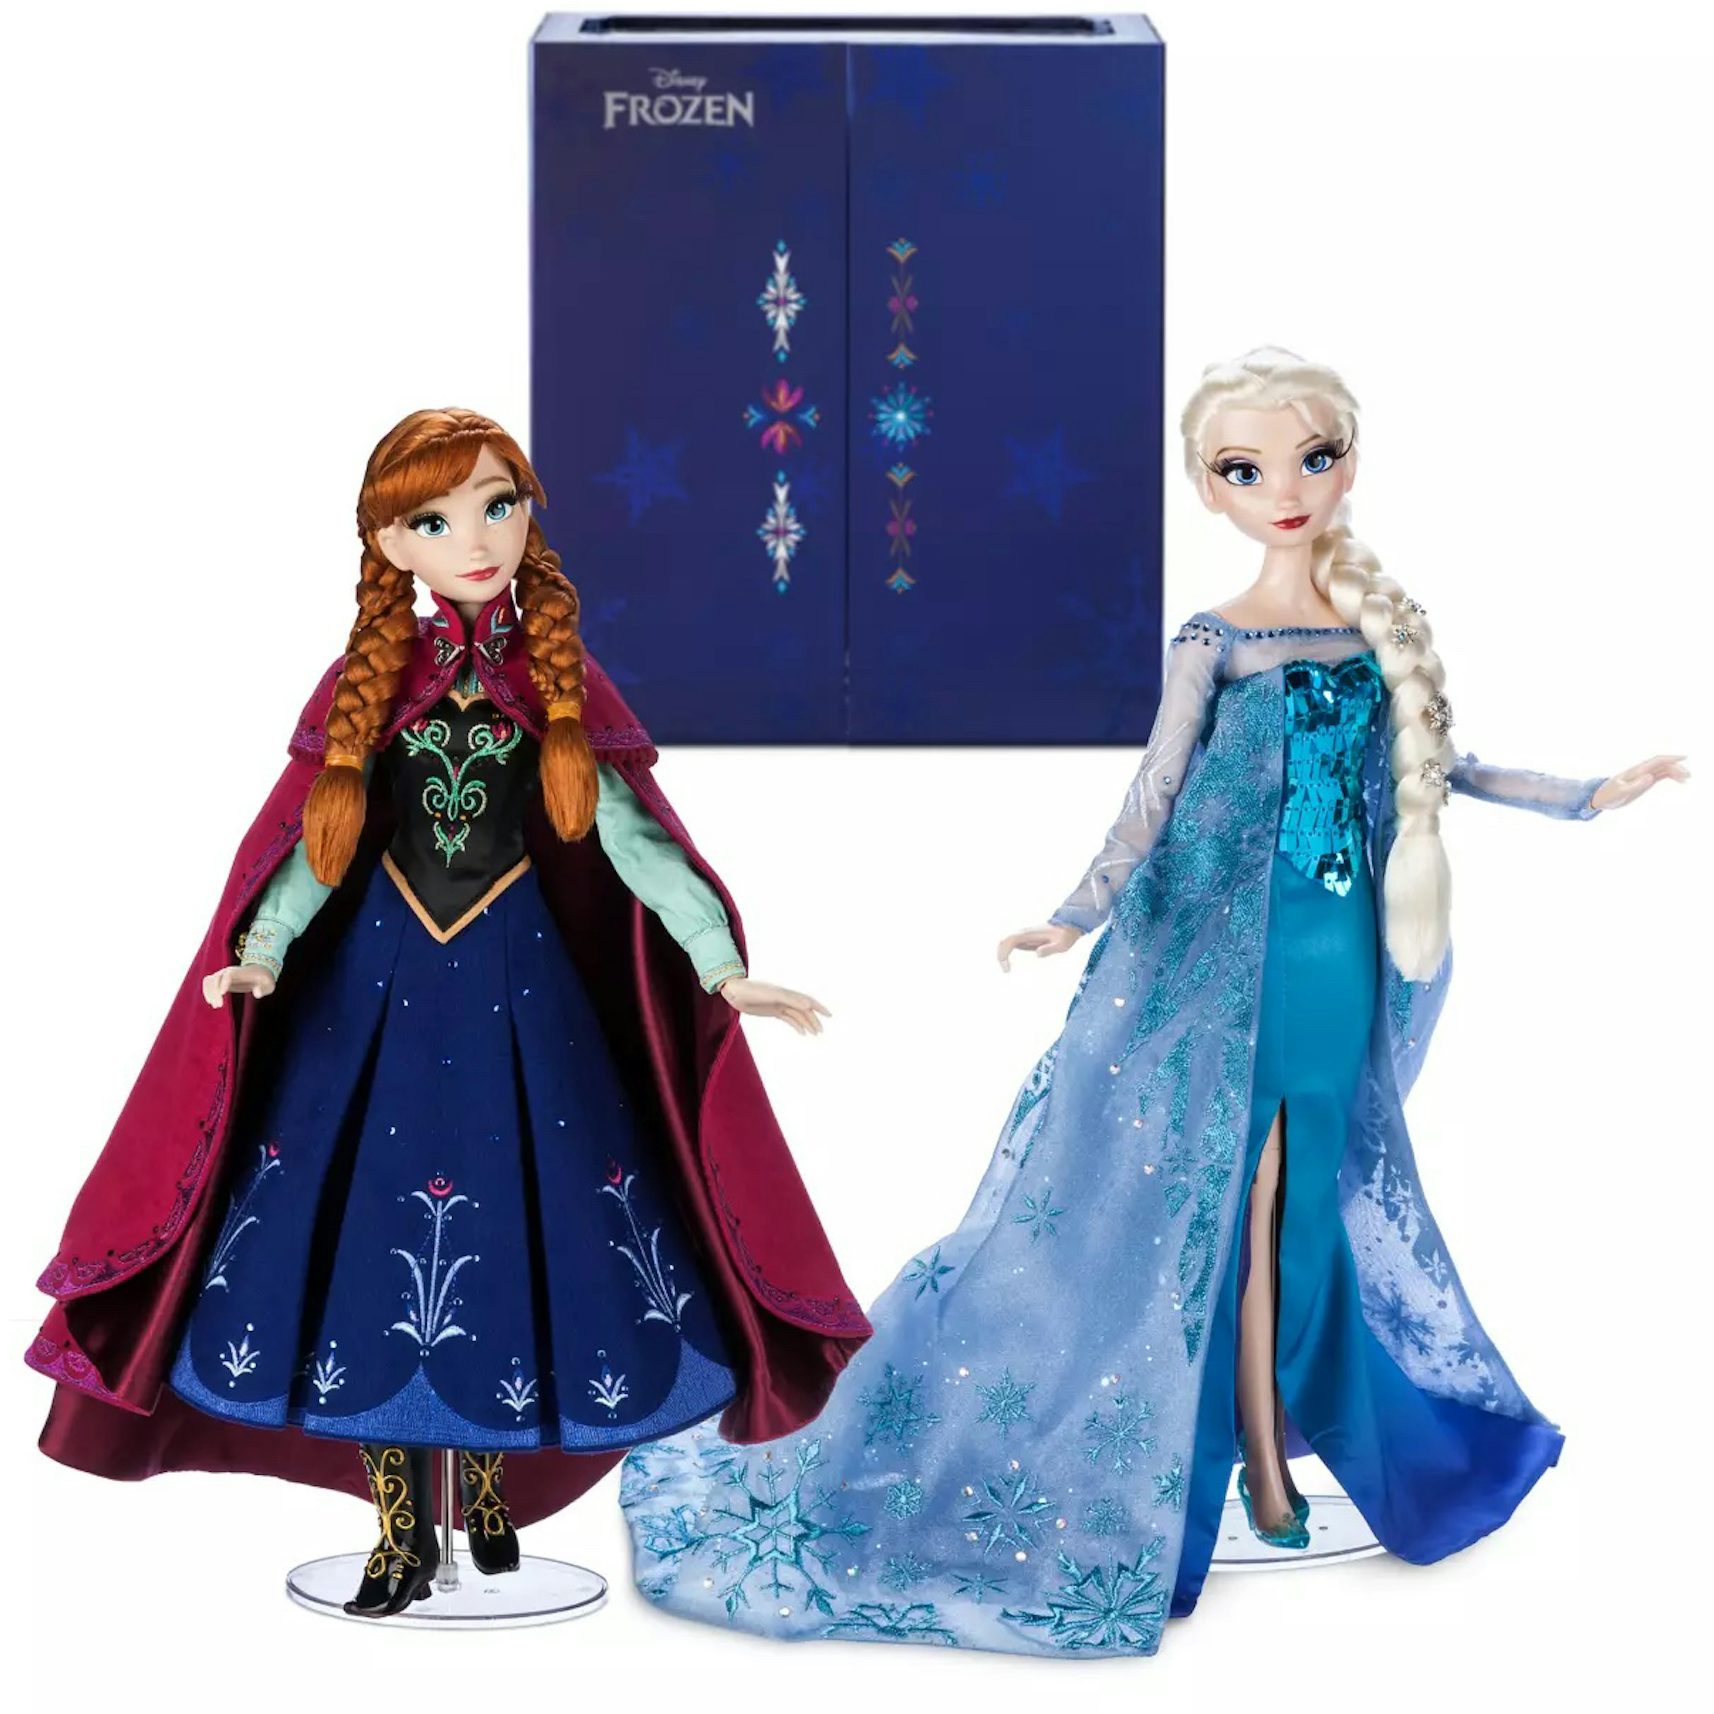 https://images.stockx.com/images/Disney-Frozen-10th-Anniversary-Anna-and-Elsa-Limited-Edition-Doll-Set.jpg?fit=fill&bg=FFFFFF&w=1200&h=857&fm=jpg&auto=compress&dpr=2&trim=color&updated_at=1700083661&q=60